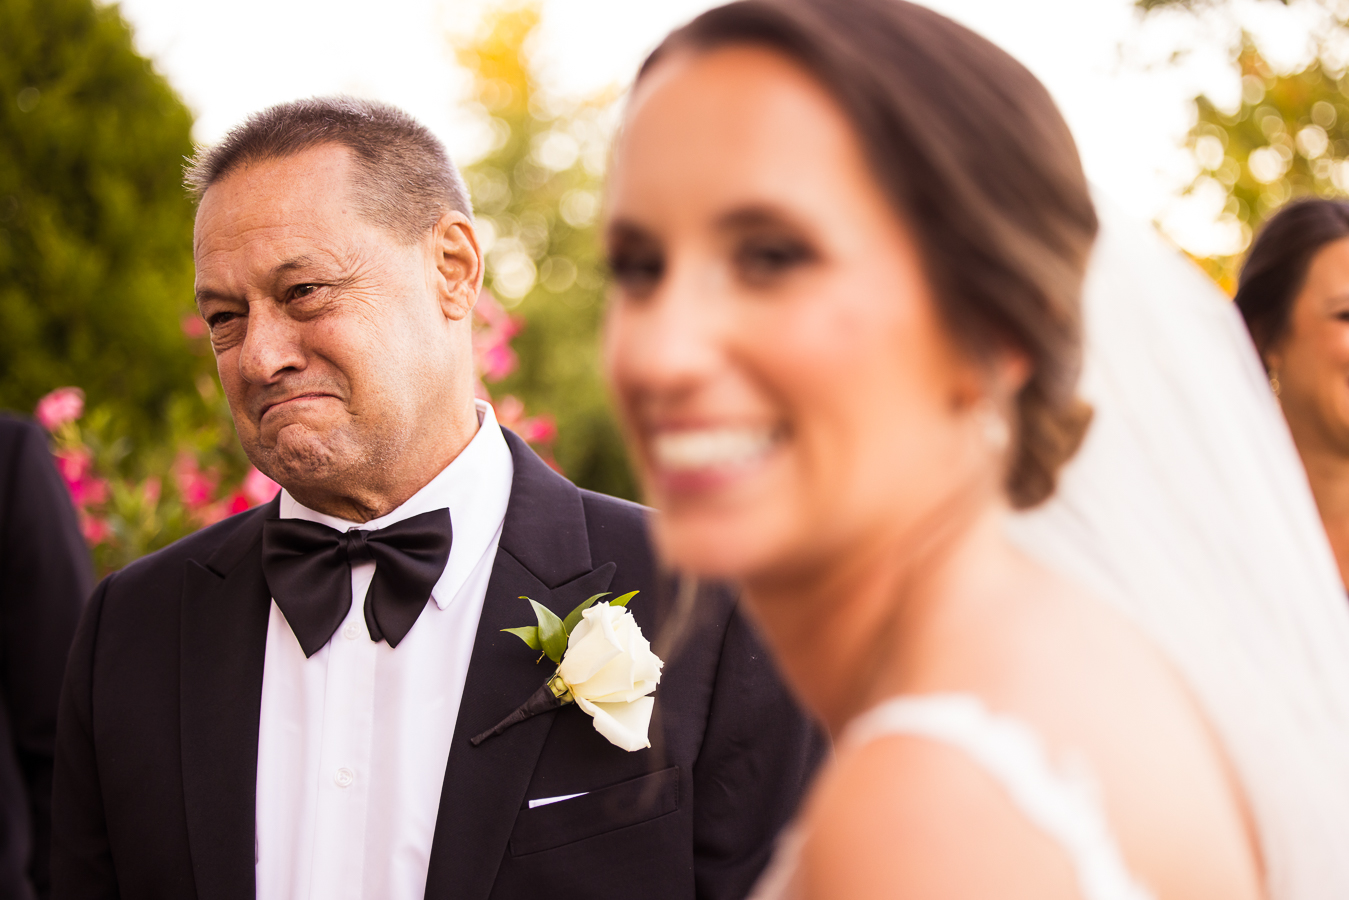 authentic wedding photographer, lisa rhinehart, captures this moment of family trying not to cry after the wedding ceremony in NJ 